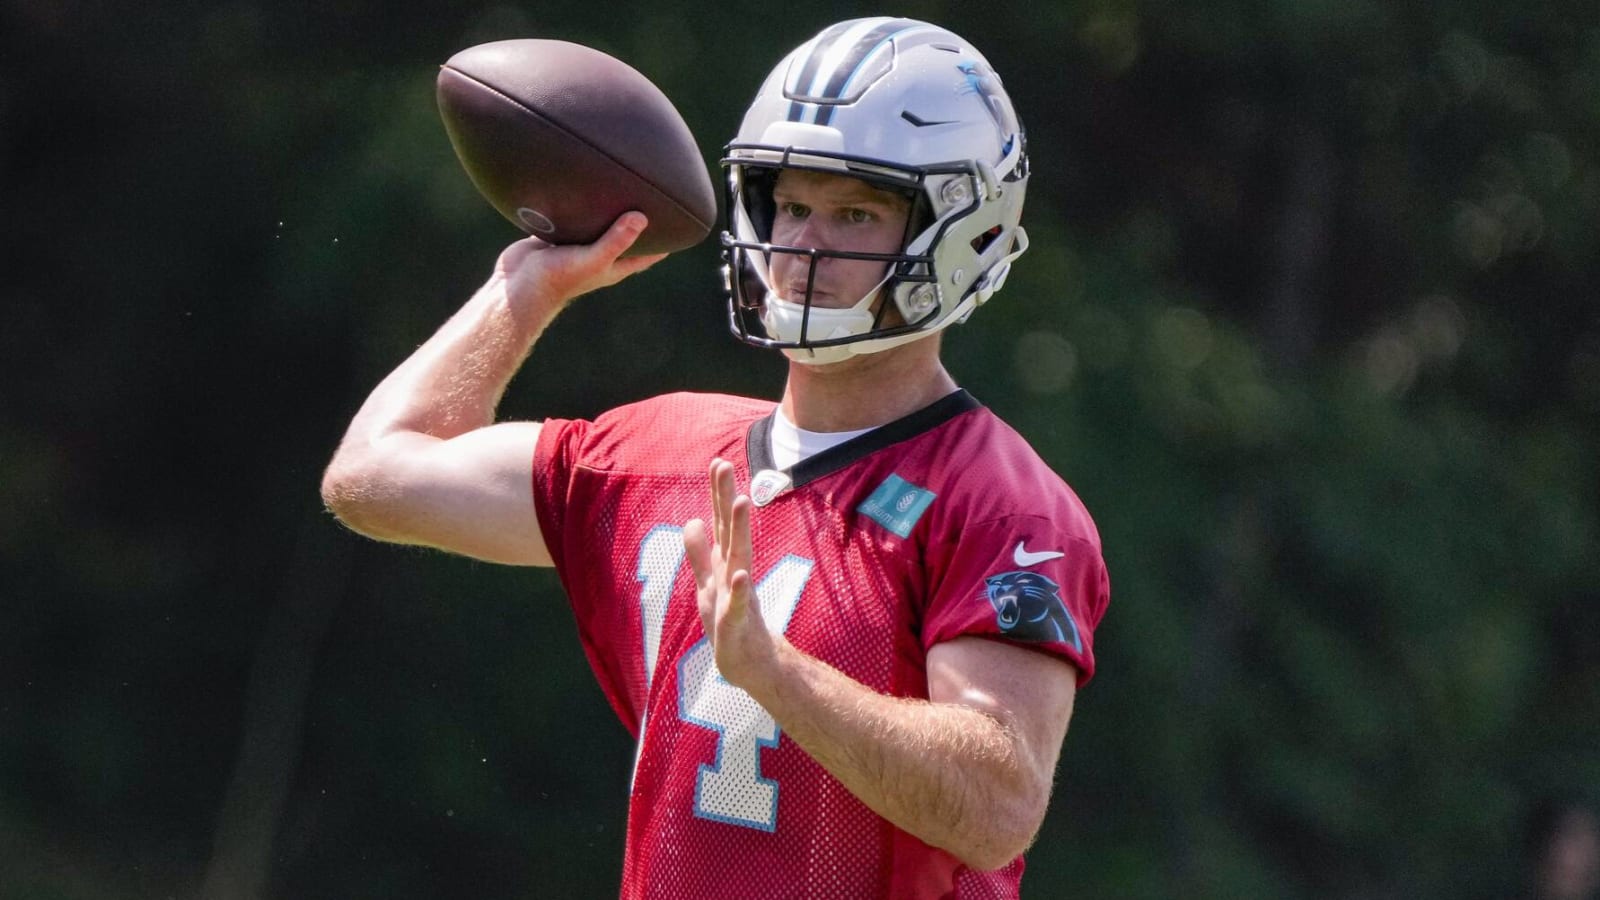 Report: Panthers still not looking to trade QB Sam Darnold